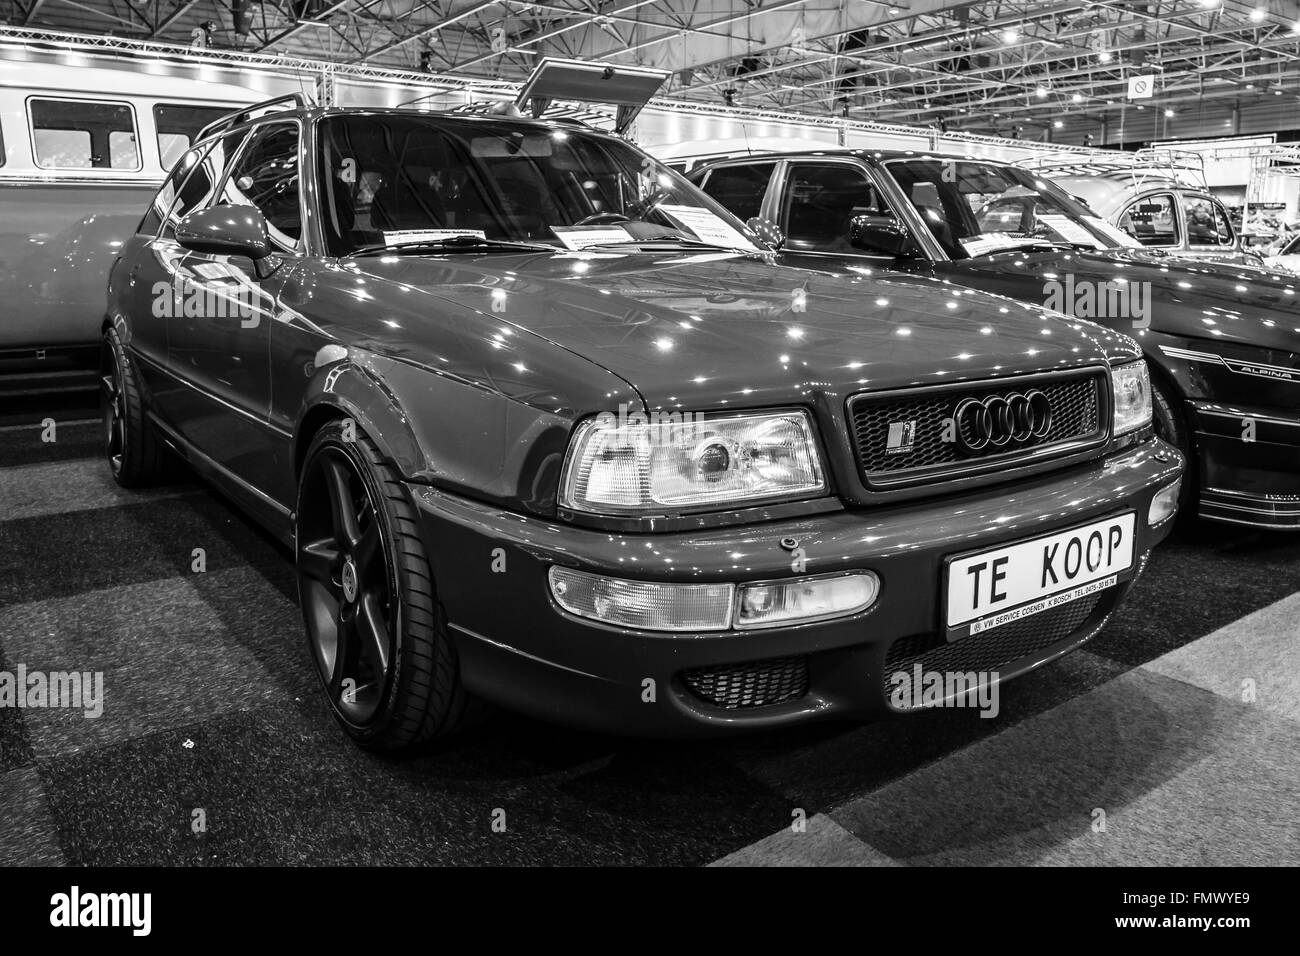 Page 2 - Audi Wagon High Resolution Stock Photography and Images - Alamy